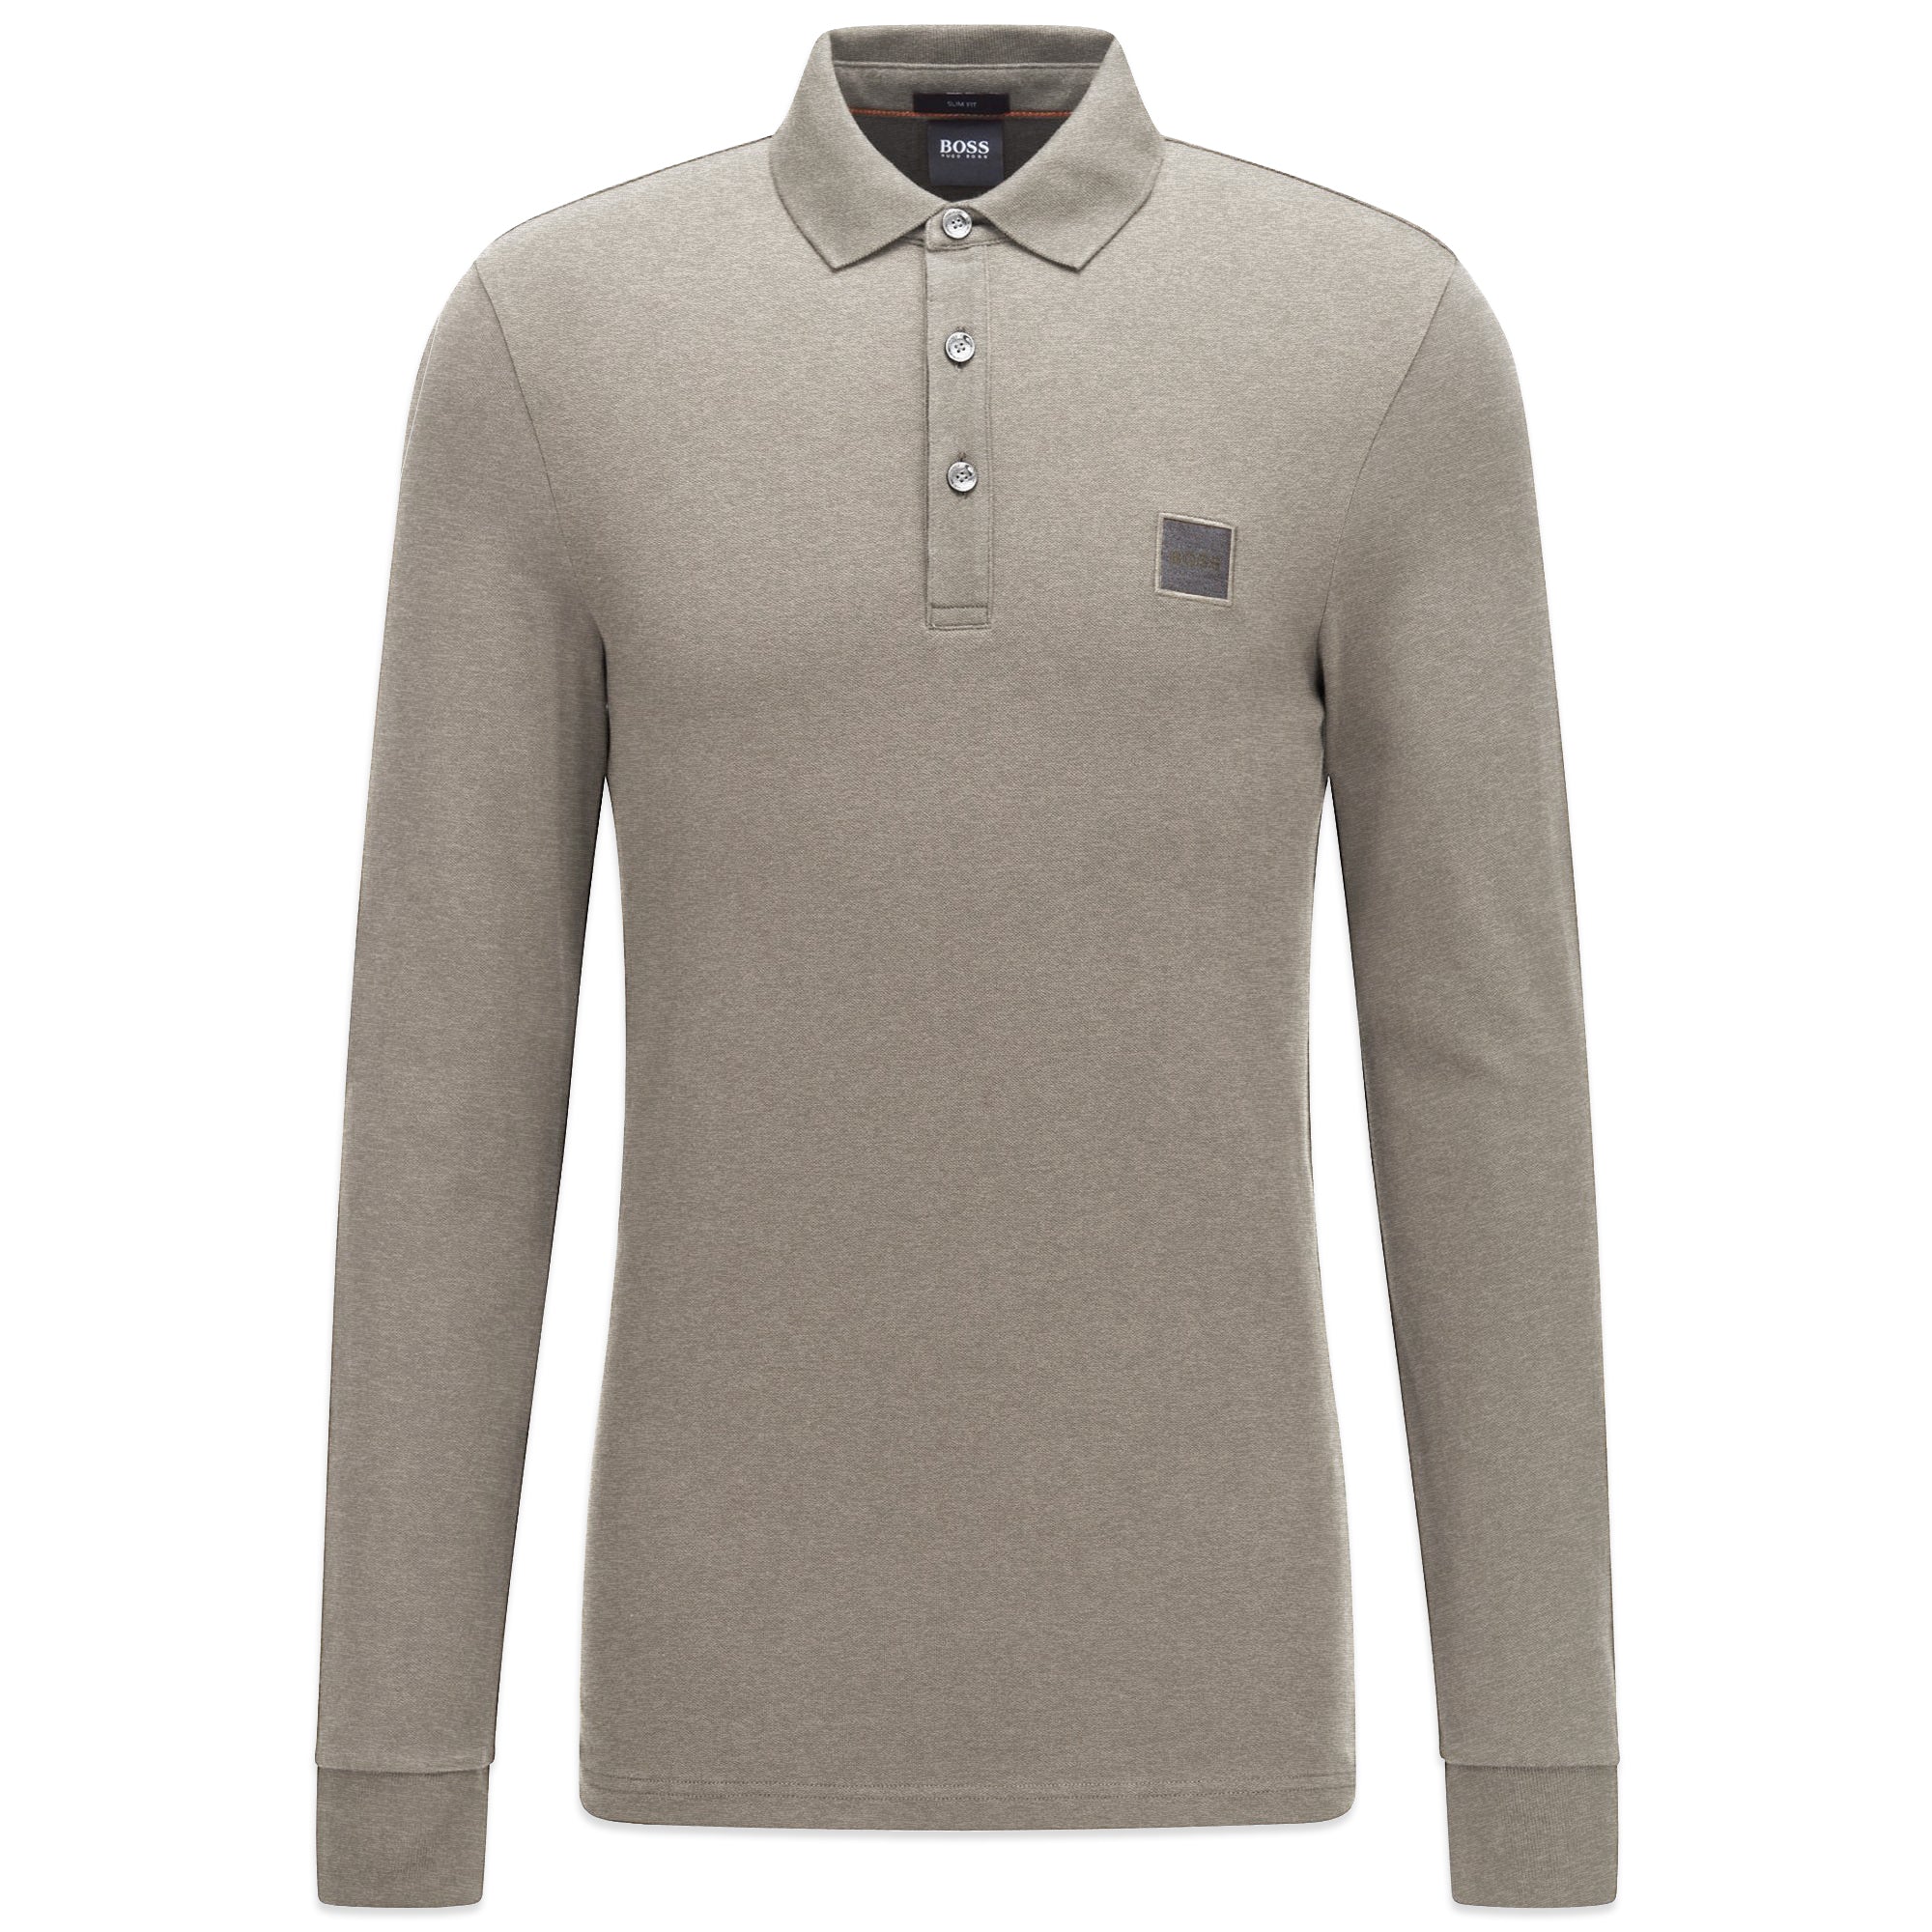 Boss Passerby 1 Long Sleeve Polo - Open Fawn Brown